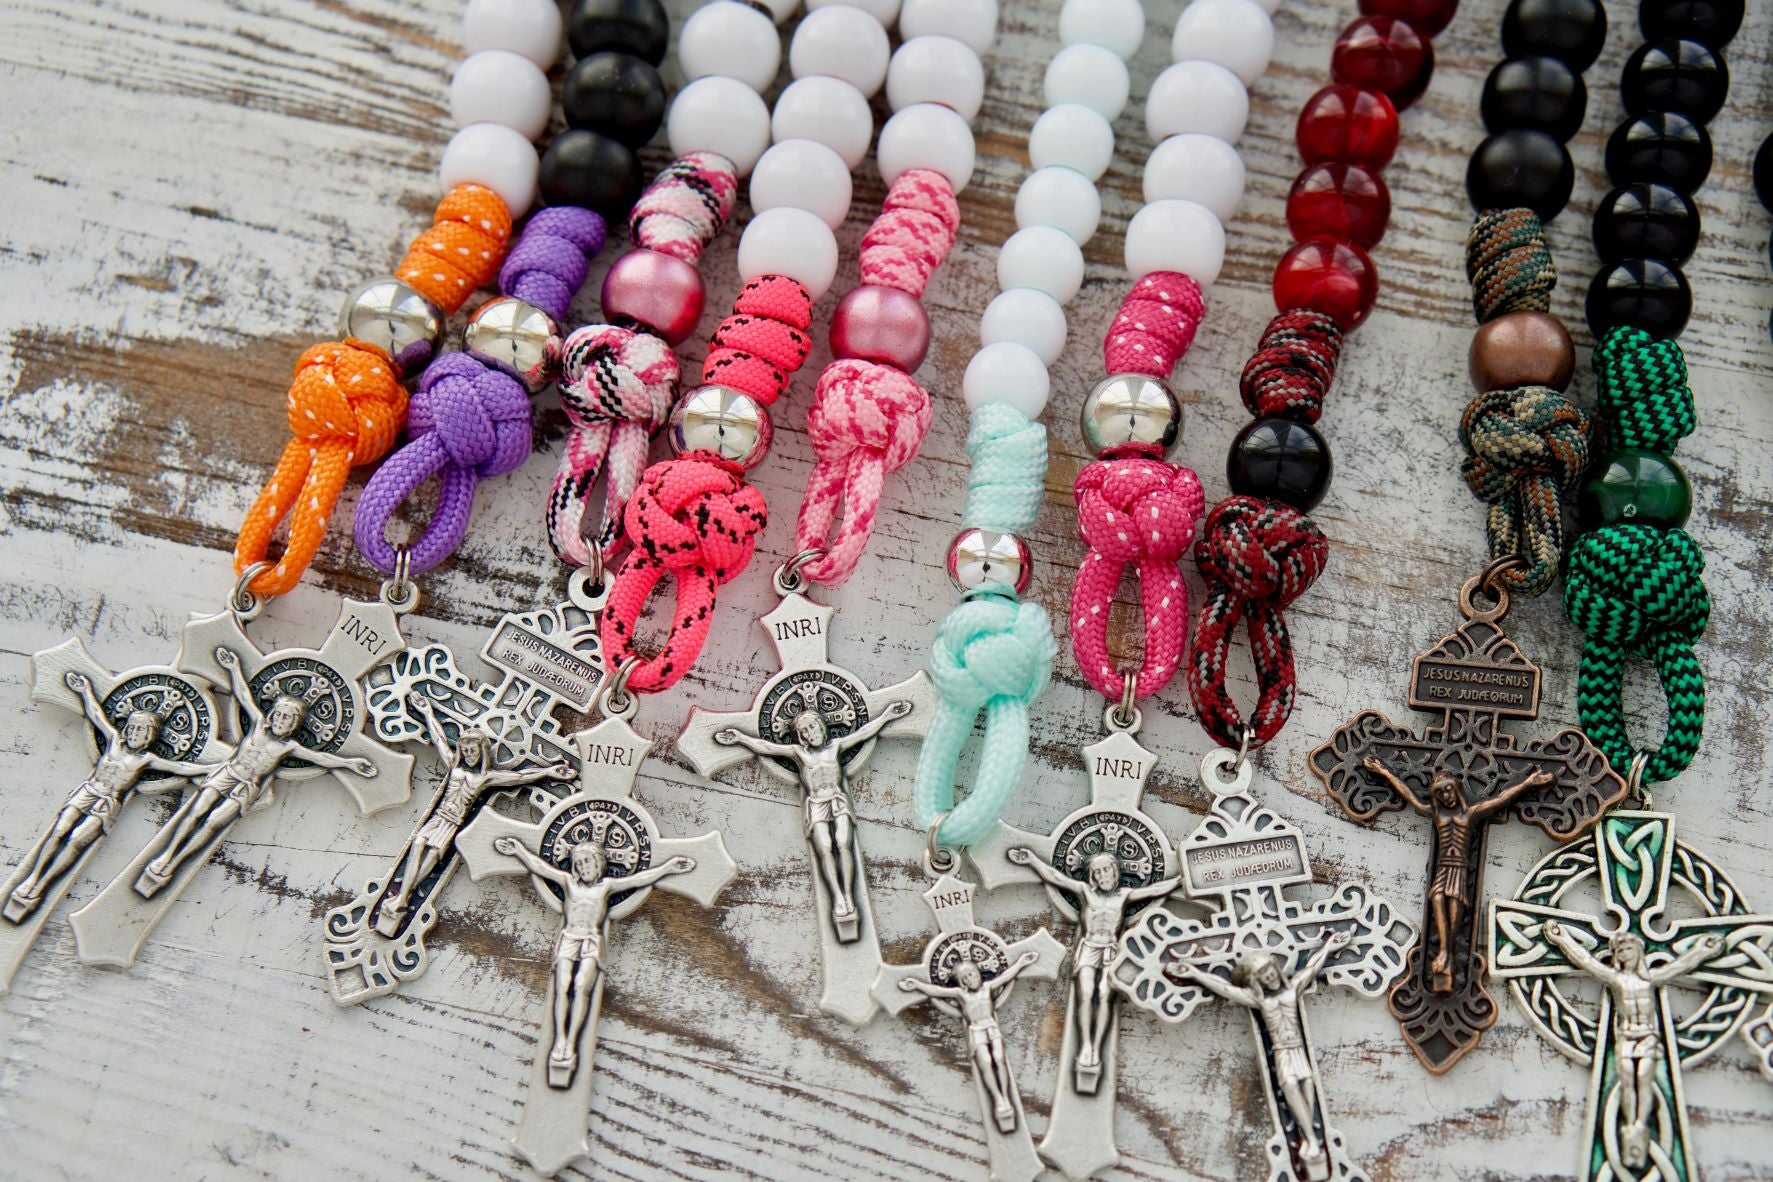 Personalize your faith with a unique, one-of-a-kind paracord rosary created just for you. Contact us to bring your vision to life today!